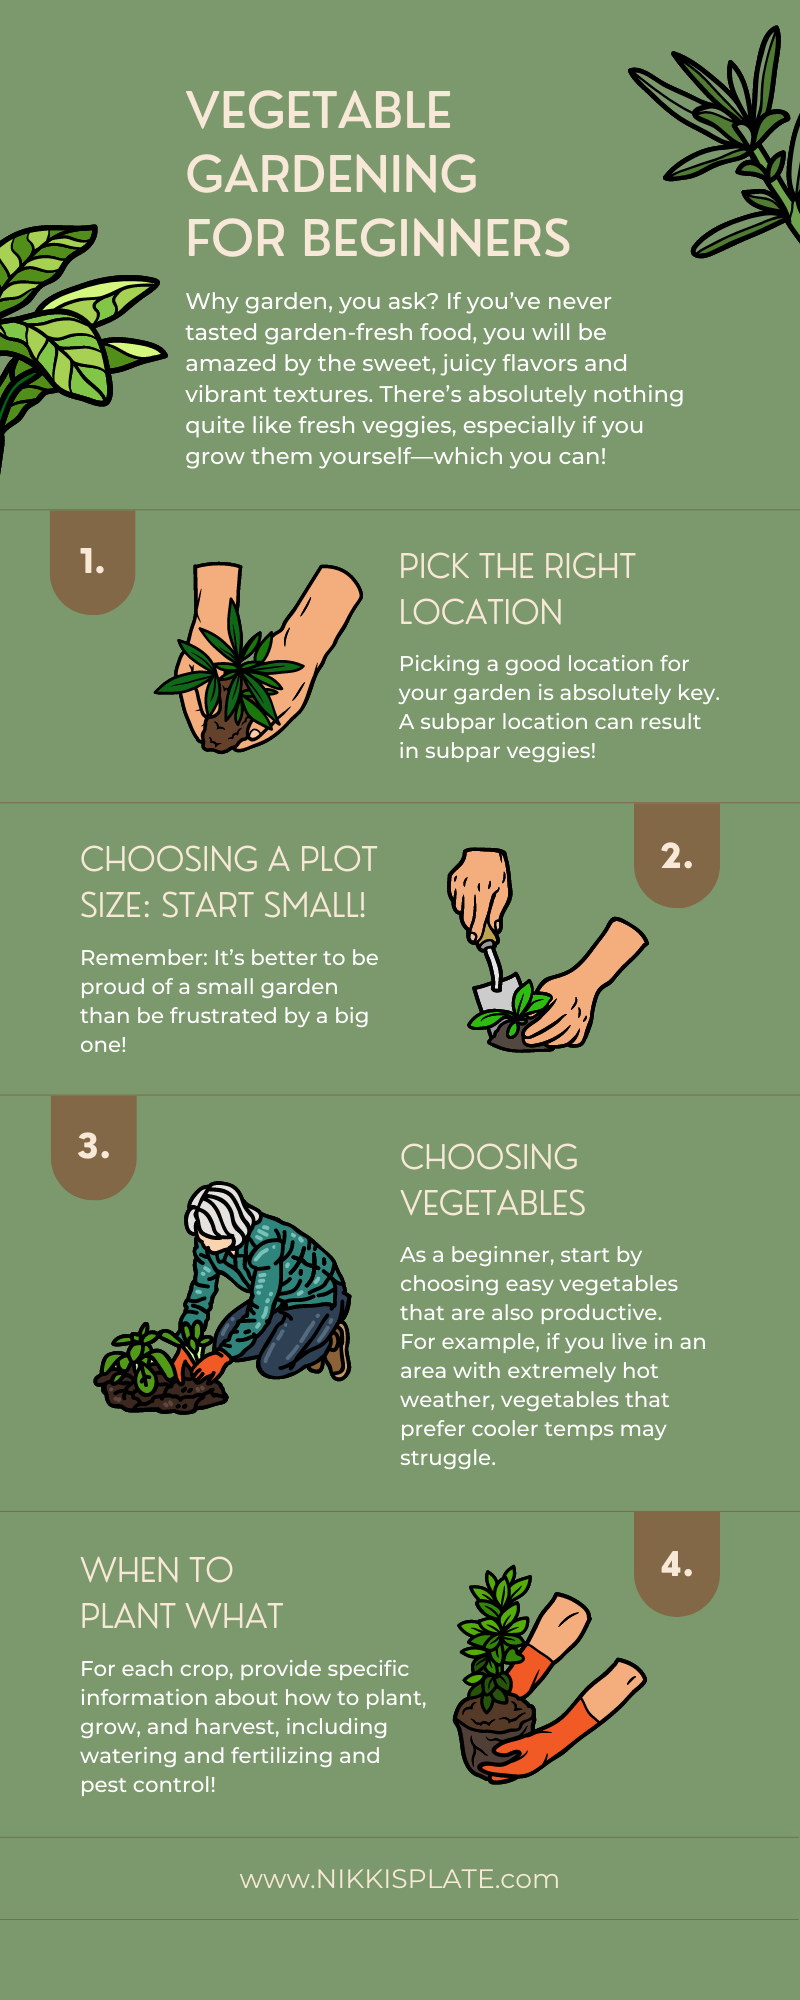 6 vegetable gardening tips every new food gardener needs to know